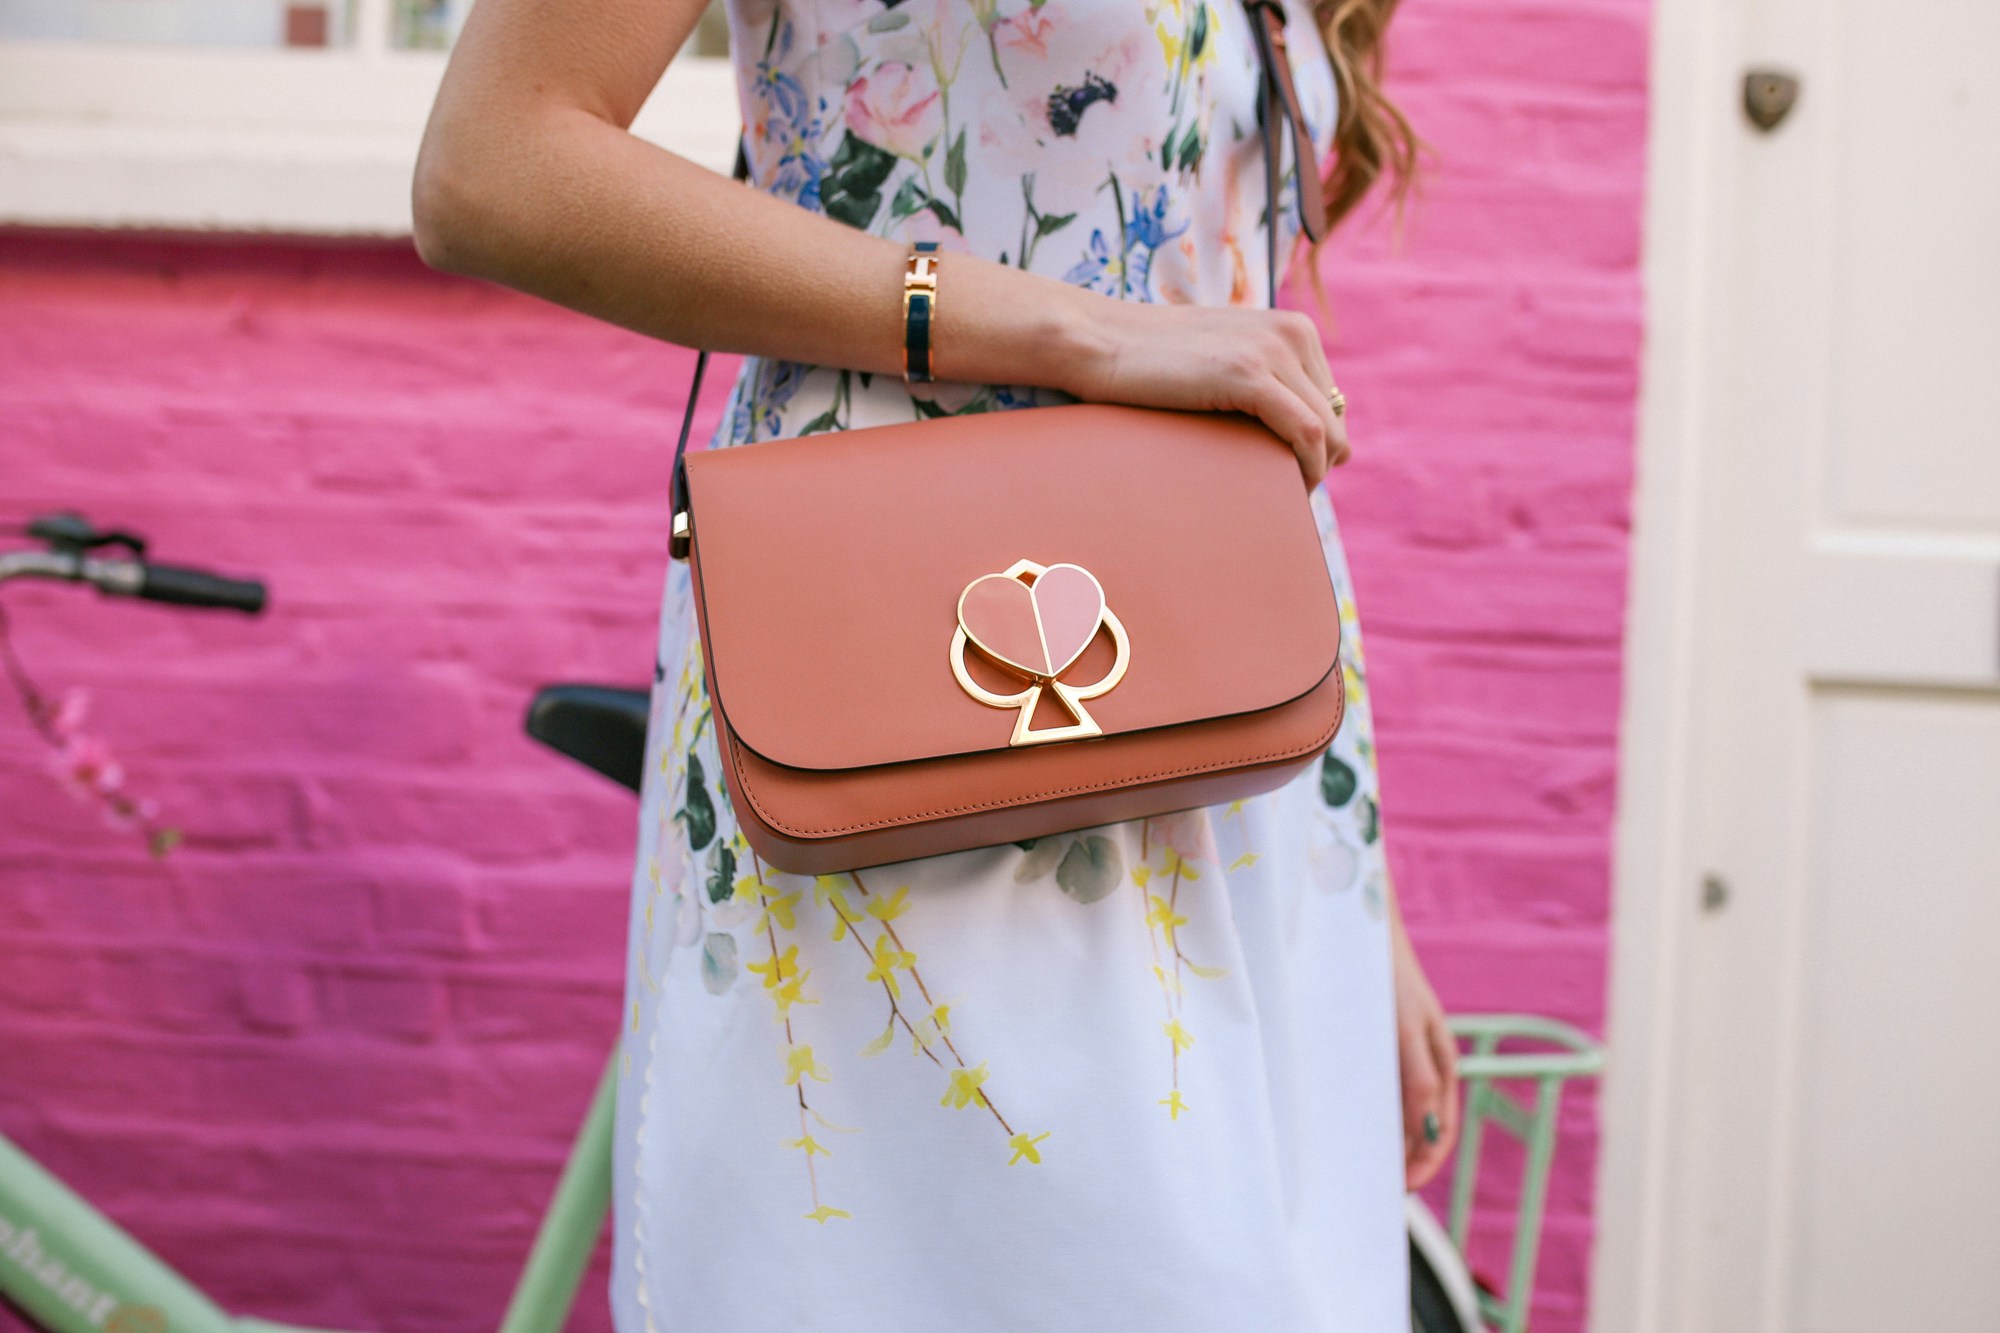 The Kate Spade Nikola bag is the perfect cute bag featuring a heart-shaped clasp.